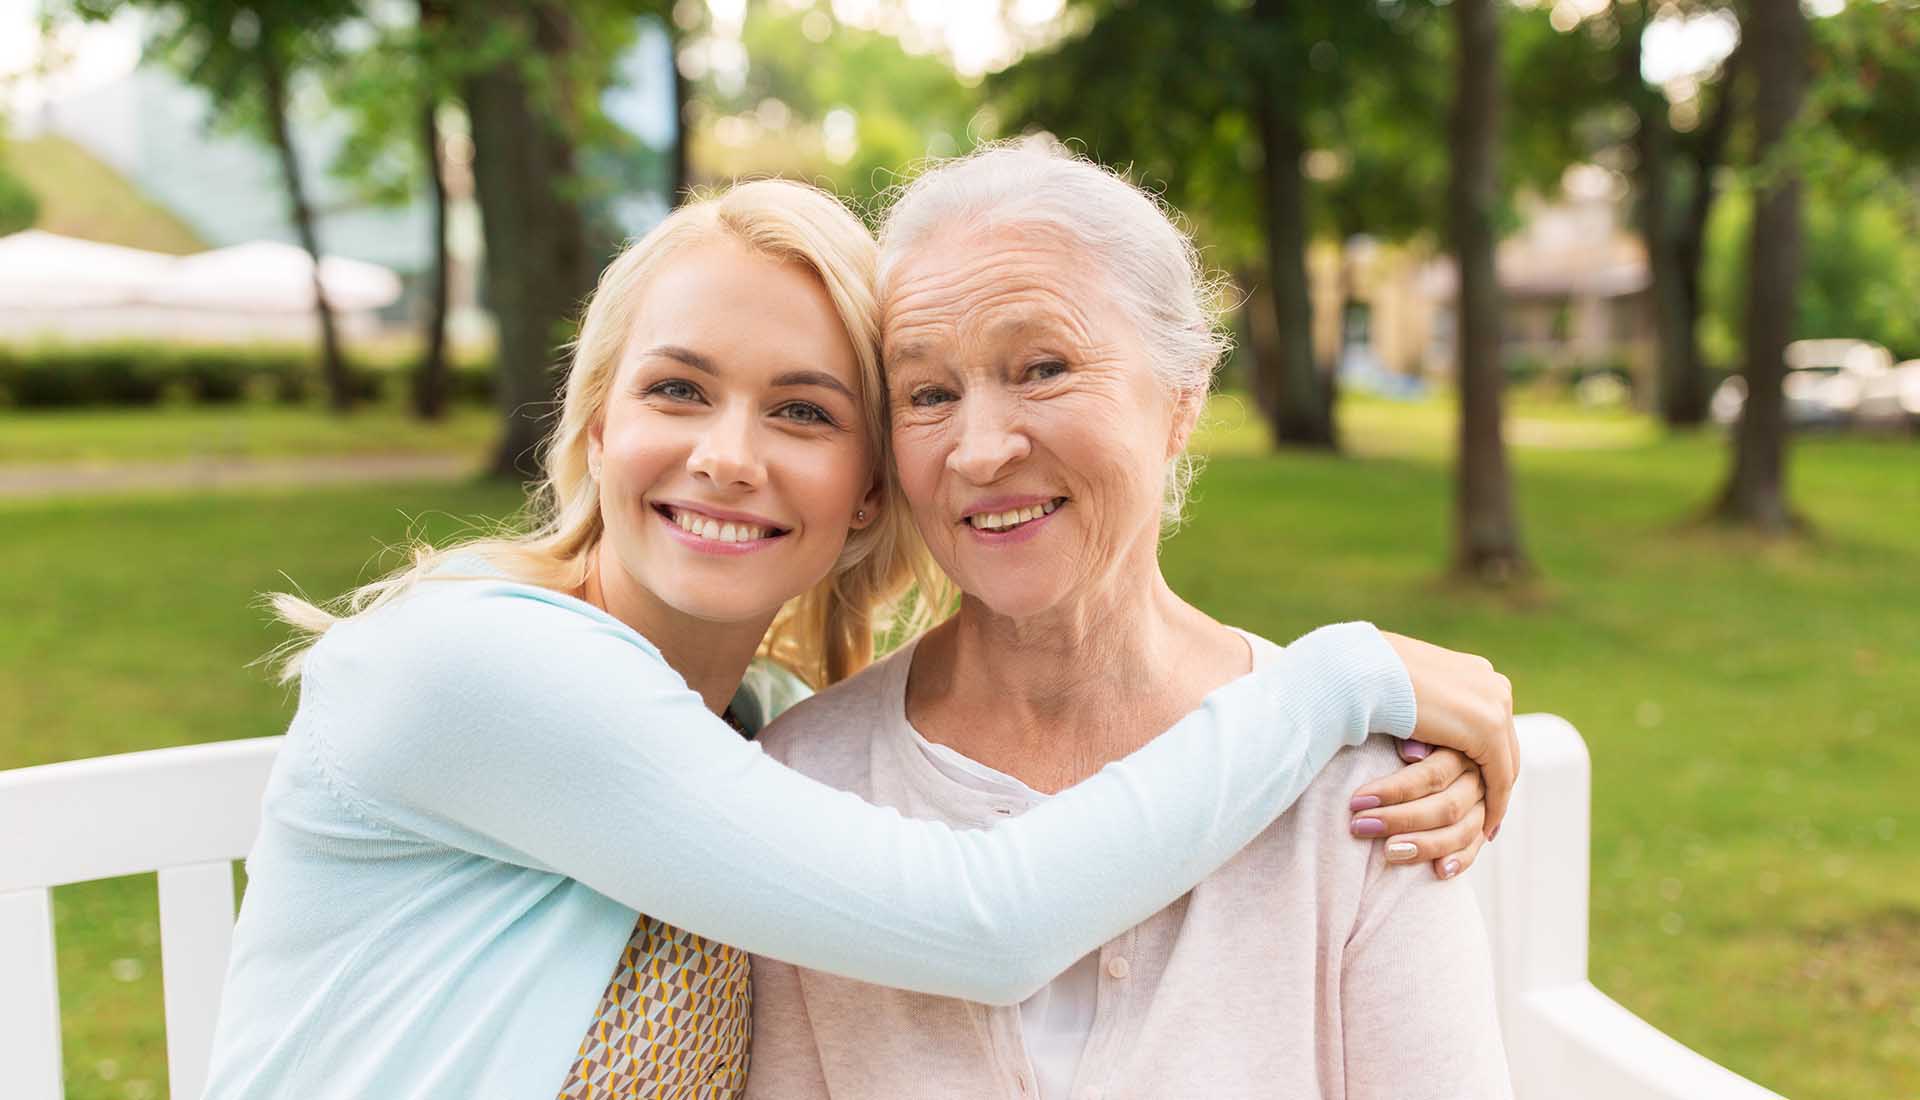 happy young woman hugging her smiling grandmother sitting on a bench in a park